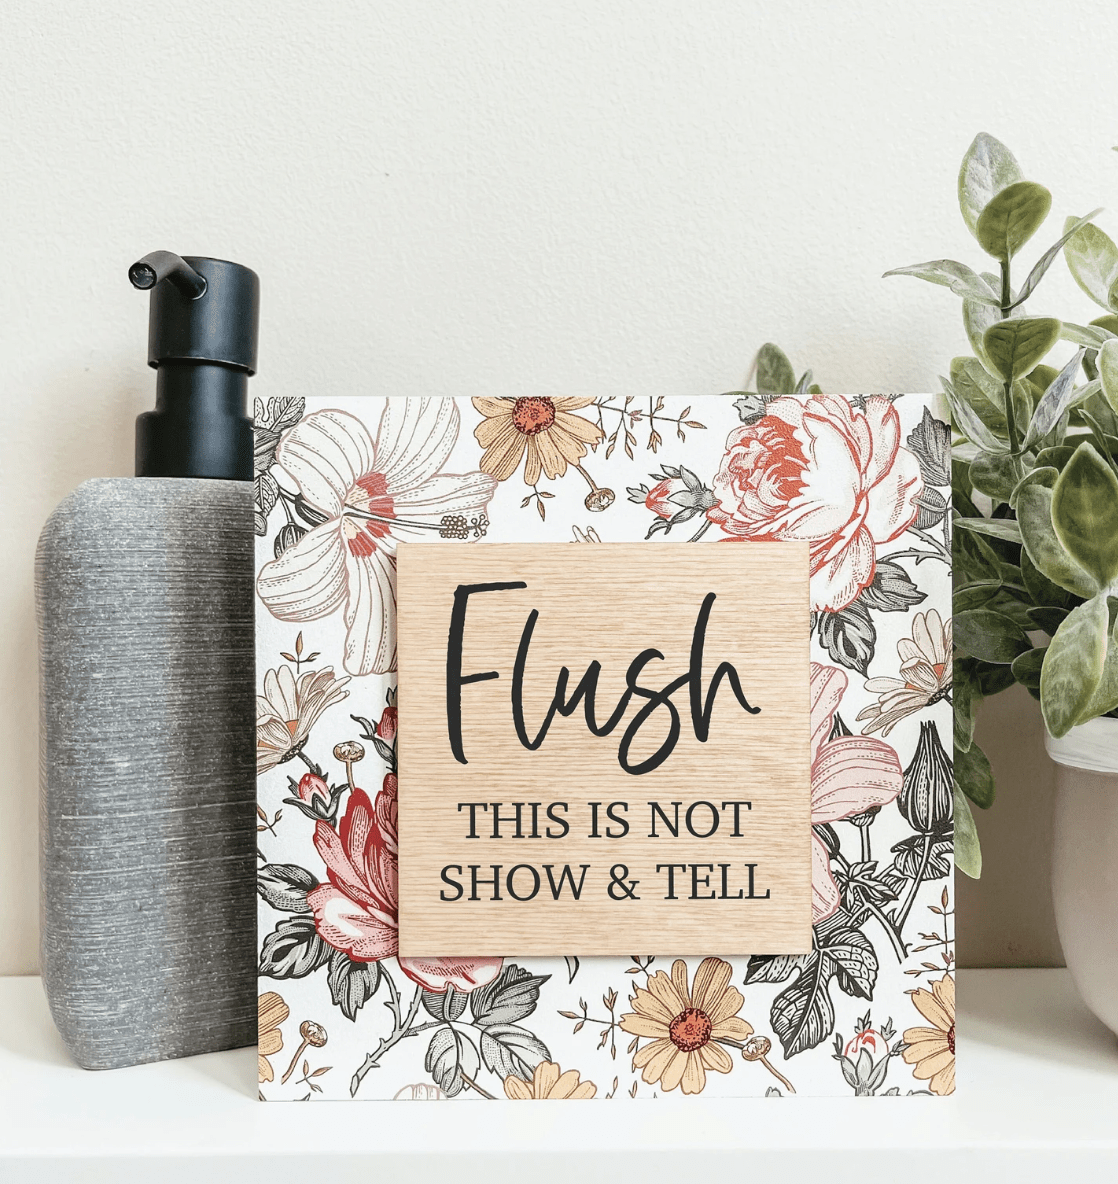 flush show and tell sign on floral background soap dispenser greenery